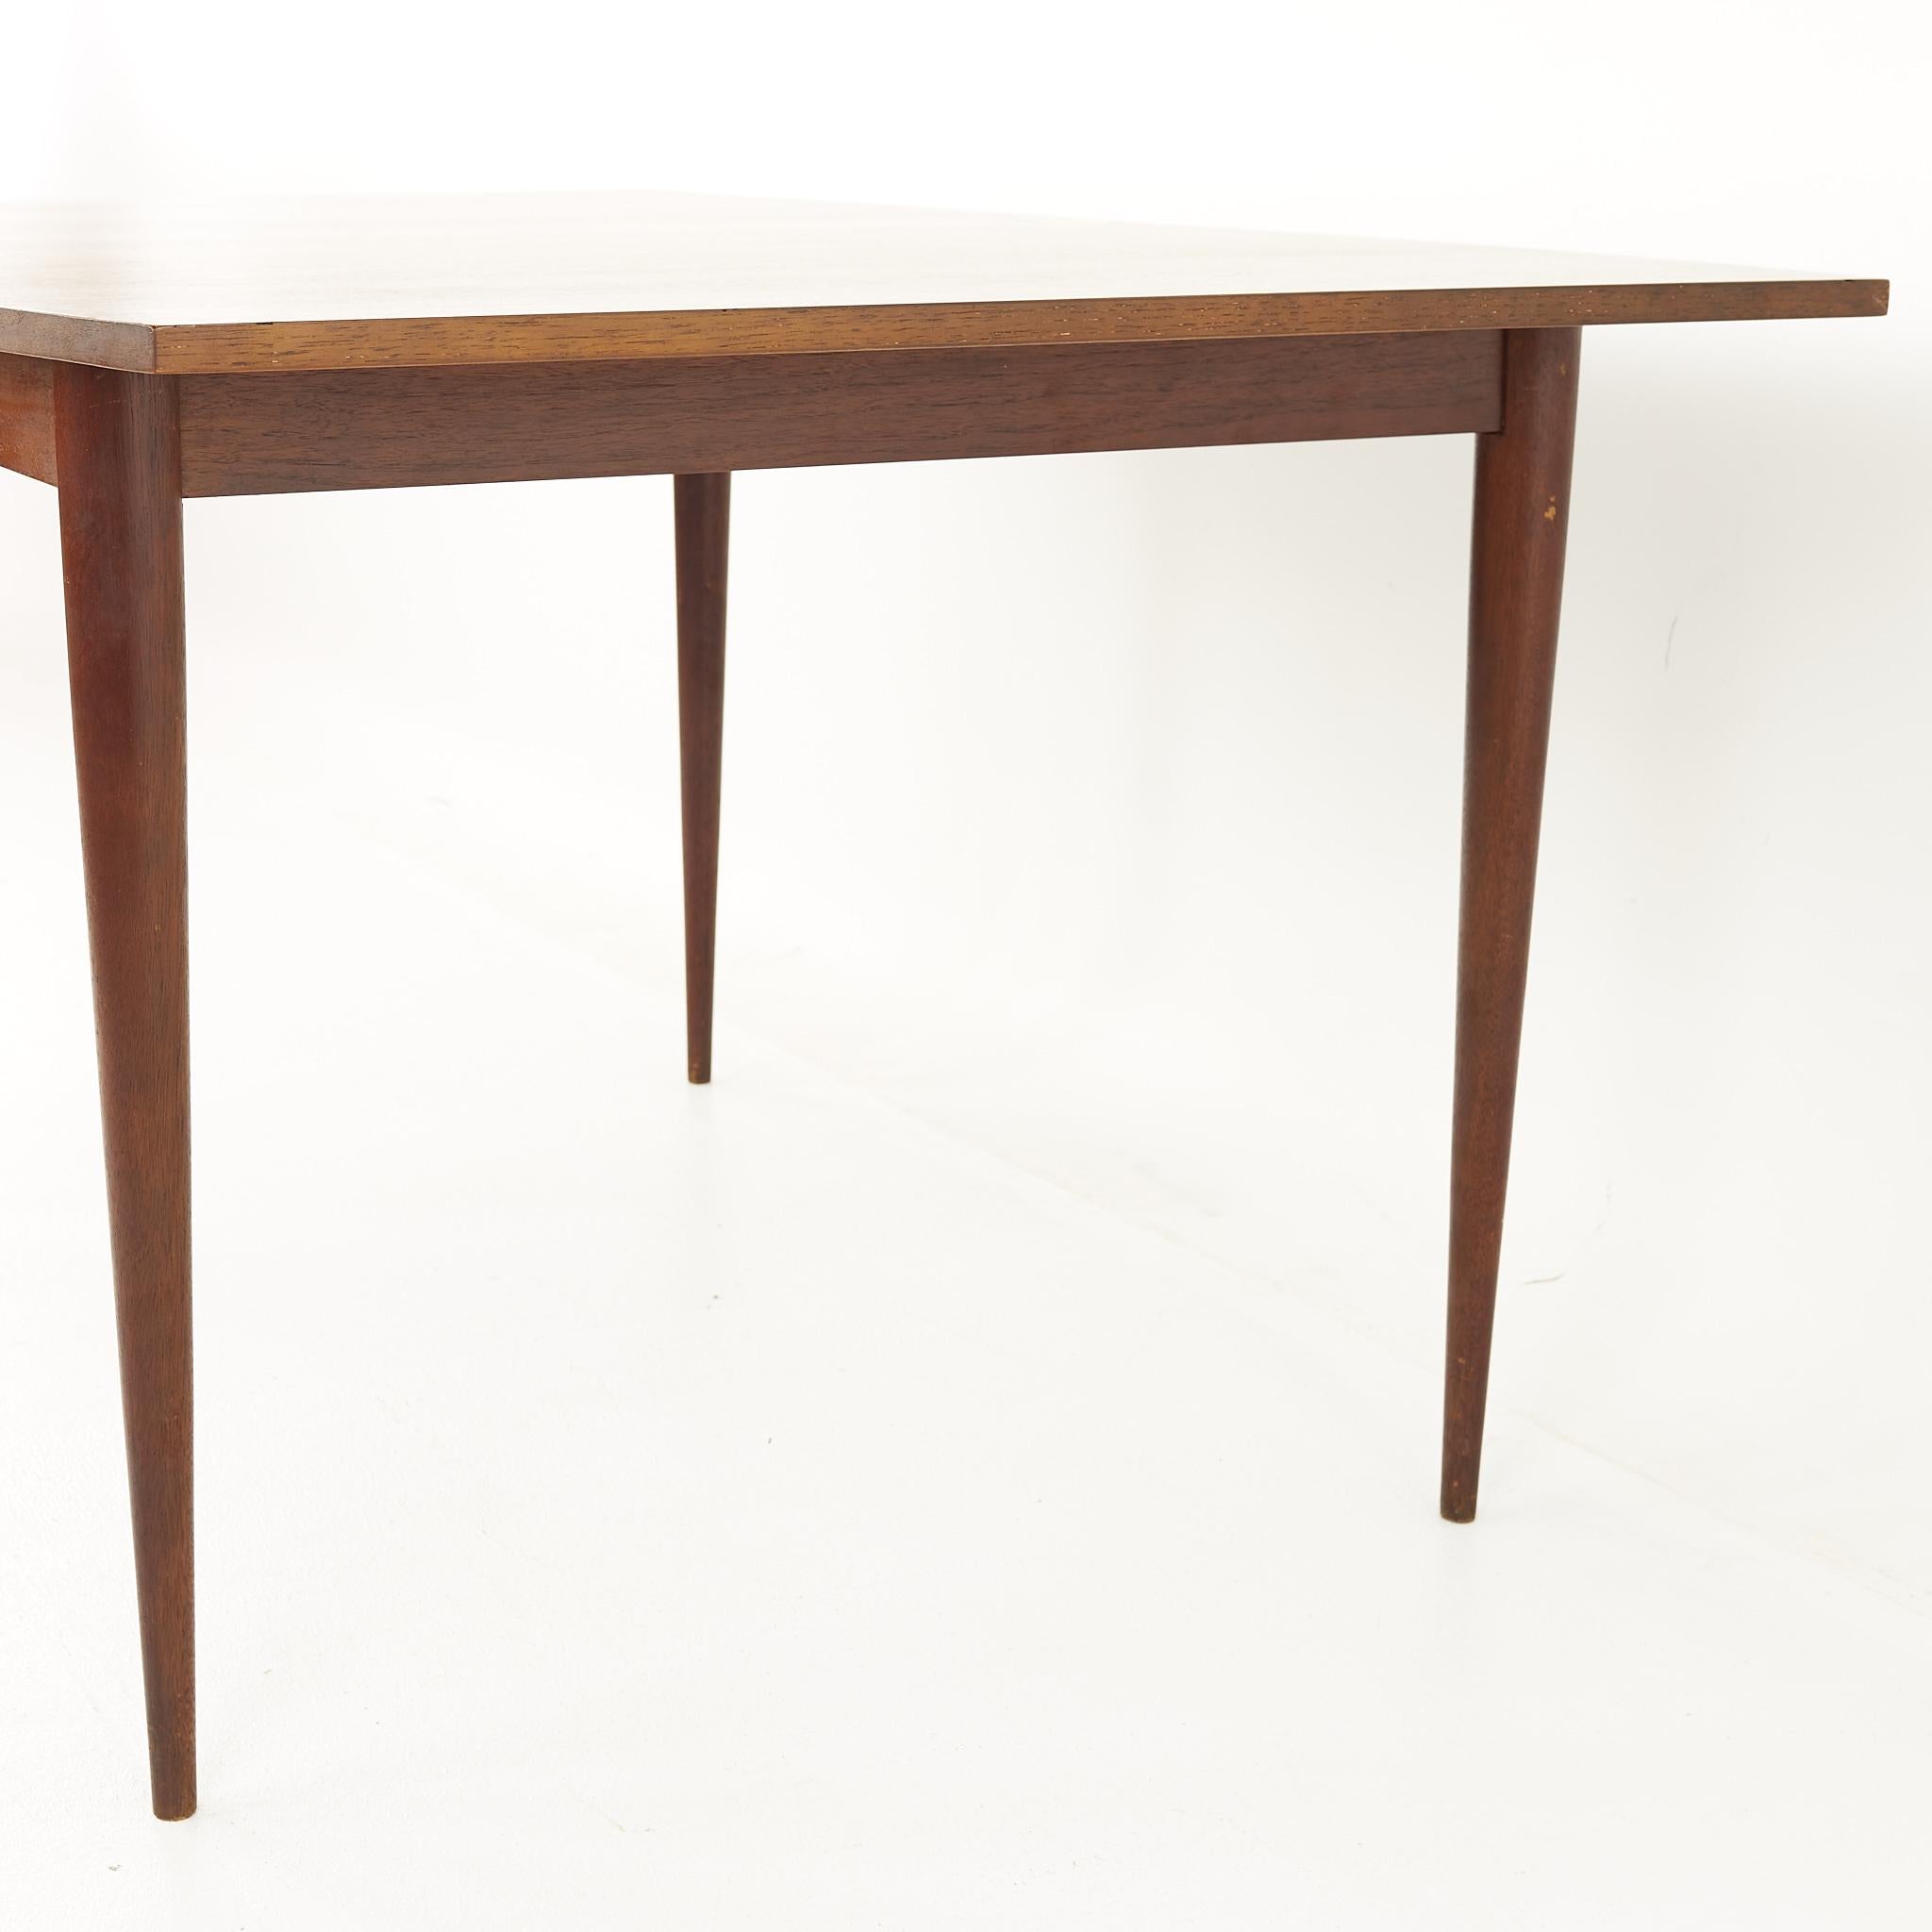 Broyhill Sculptra Mid Century Walnut Dining Table with 3 Leaves 10